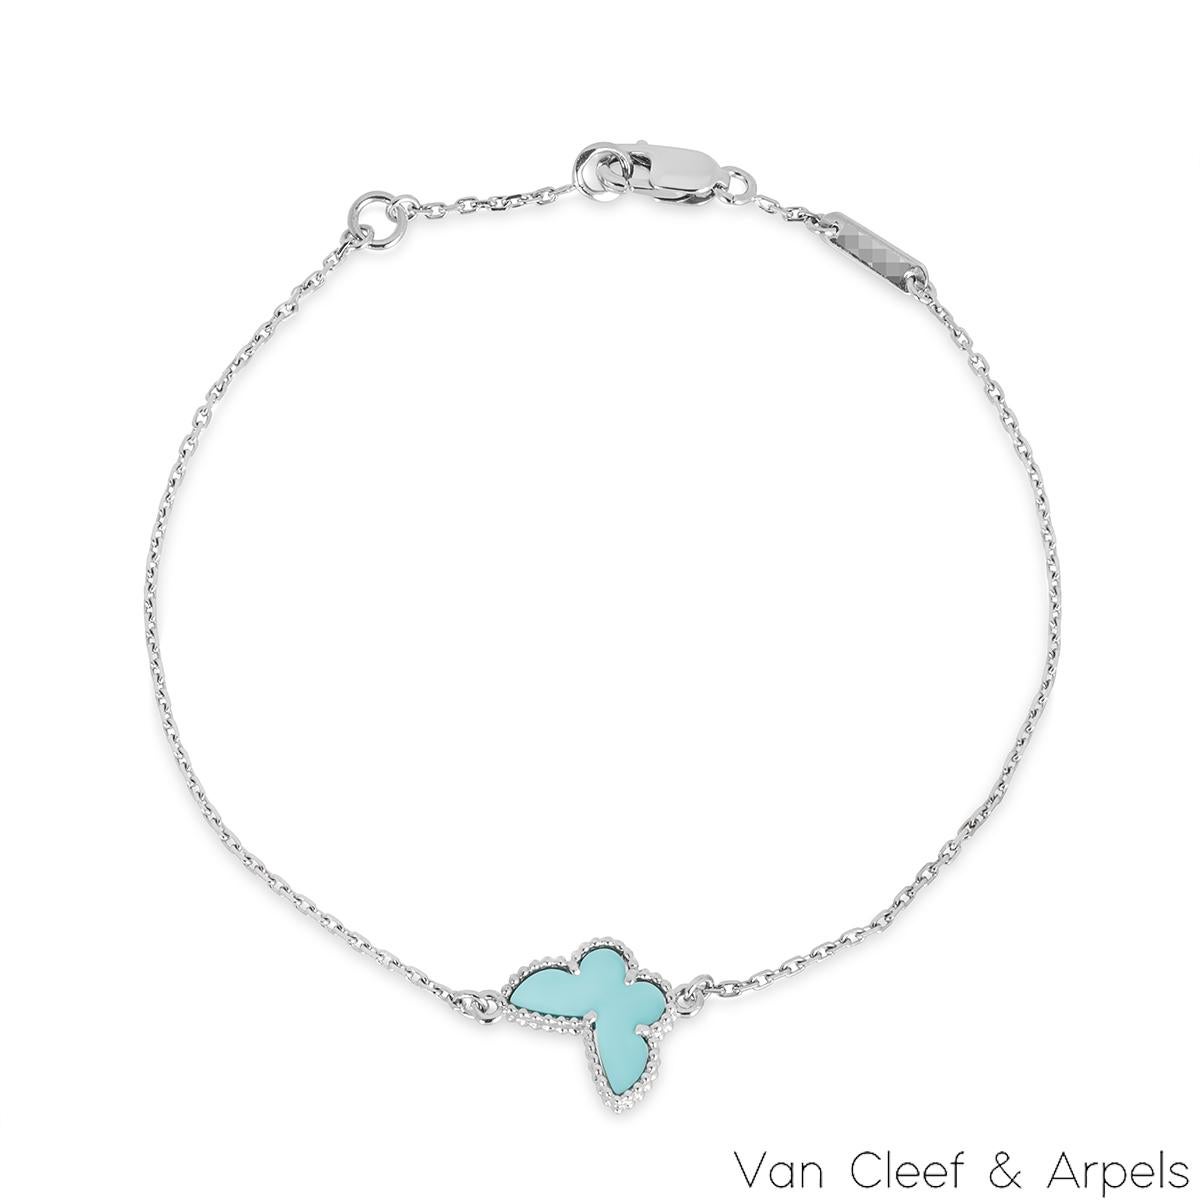 A lovely 18k white gold bracelet from the Sweet Alhambra collection by Van Cleef & Arpels. The Butterfly motif has a turquoise inlay displayed on both sides, complemented by a beaded outer edge. The butterfly motif measures 1.8cm in height and 2.1cm